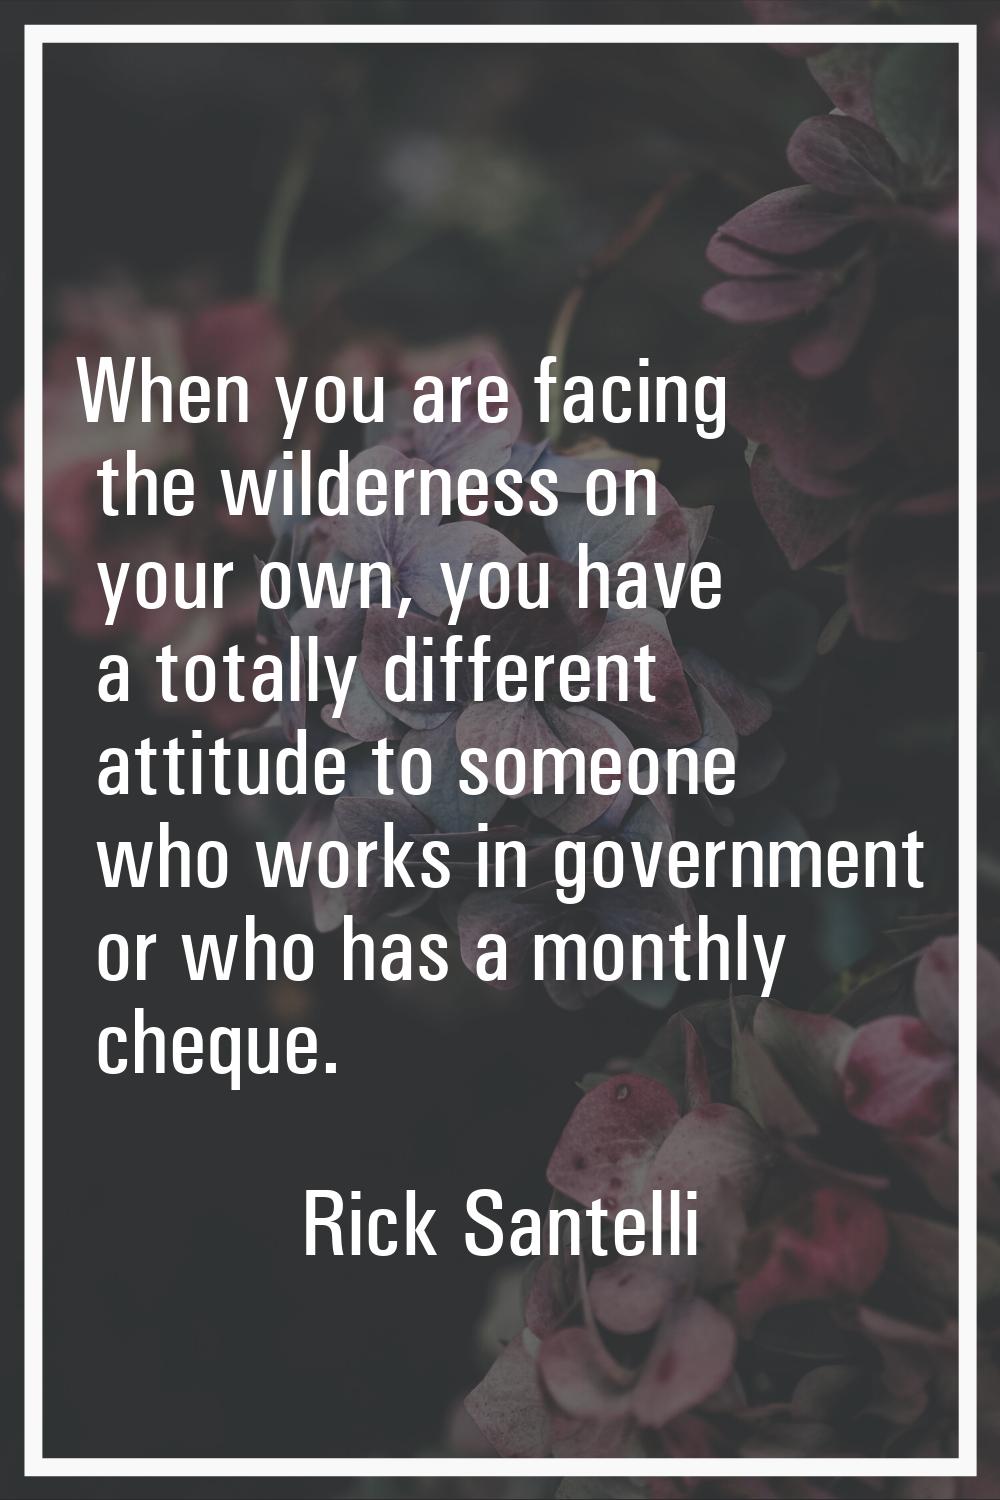 When you are facing the wilderness on your own, you have a totally different attitude to someone wh